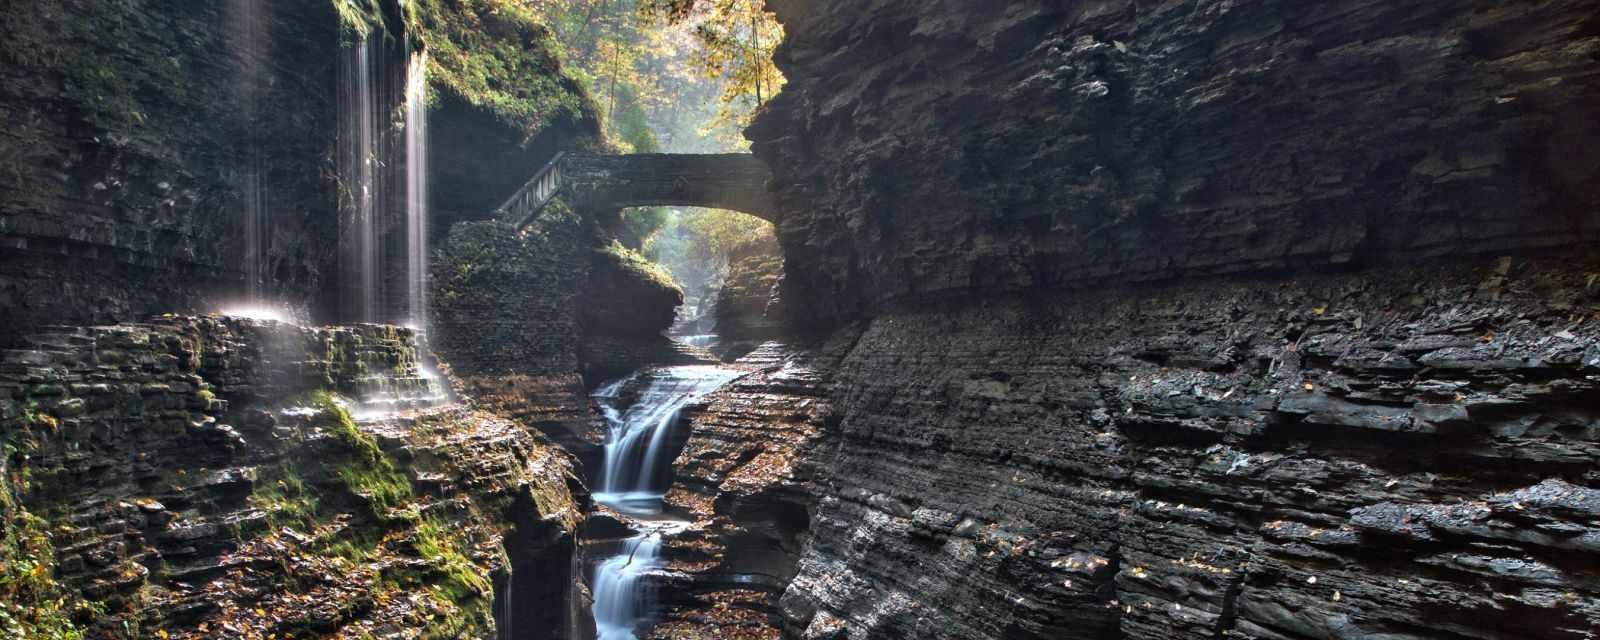 Best Time and Tips for the Gorge Trail in Watkins Glen State Park